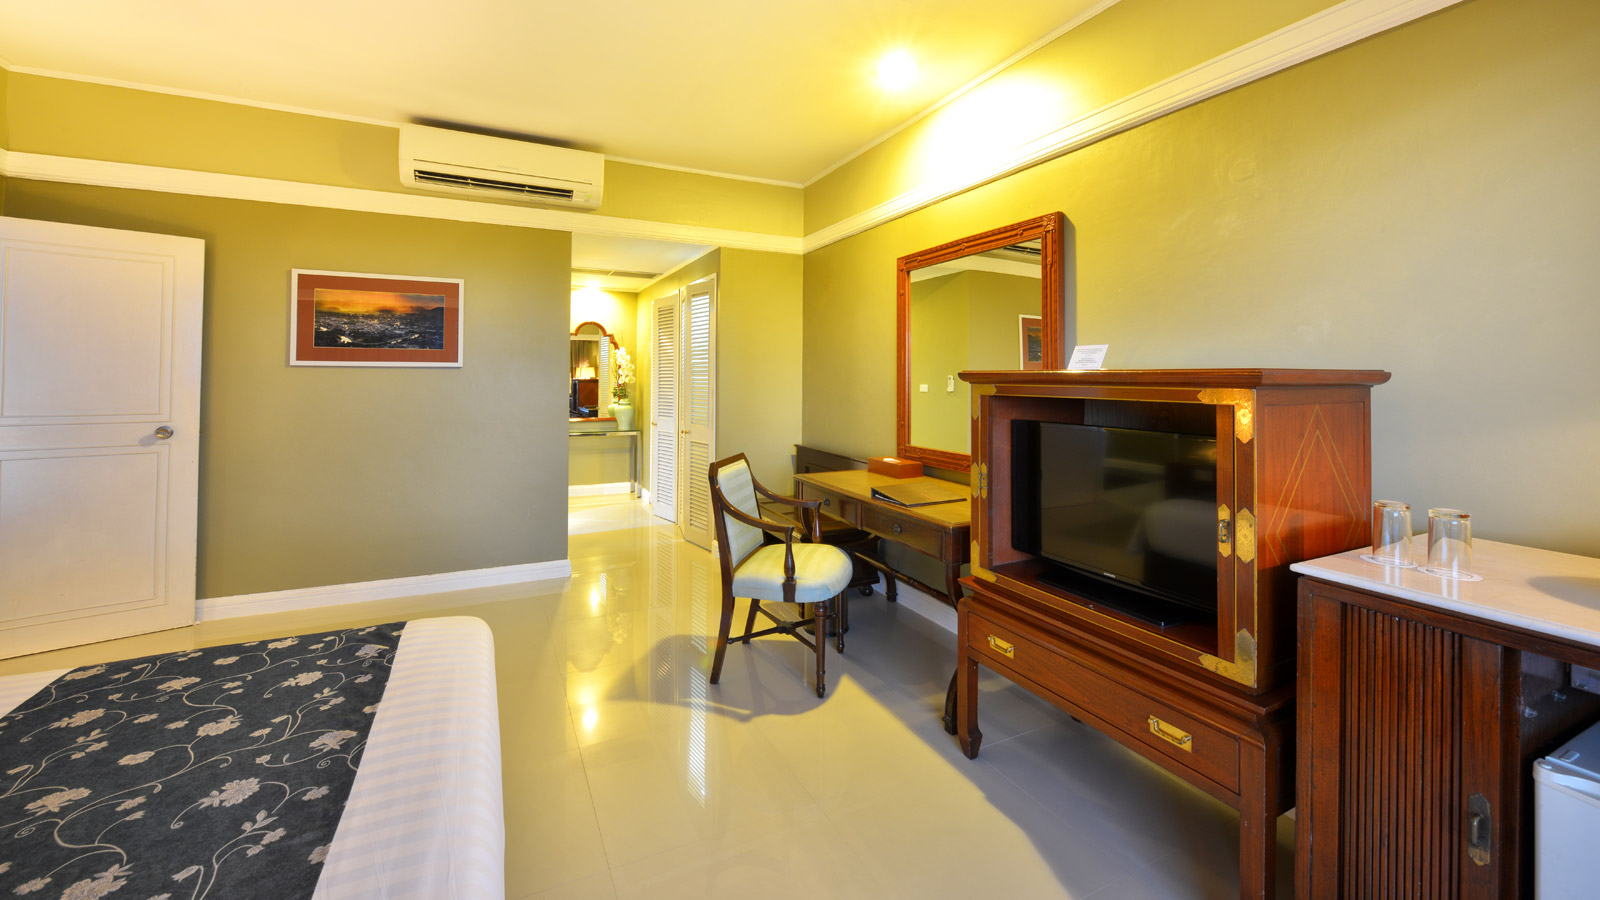 Executive Suites at Loei Palace Hotel